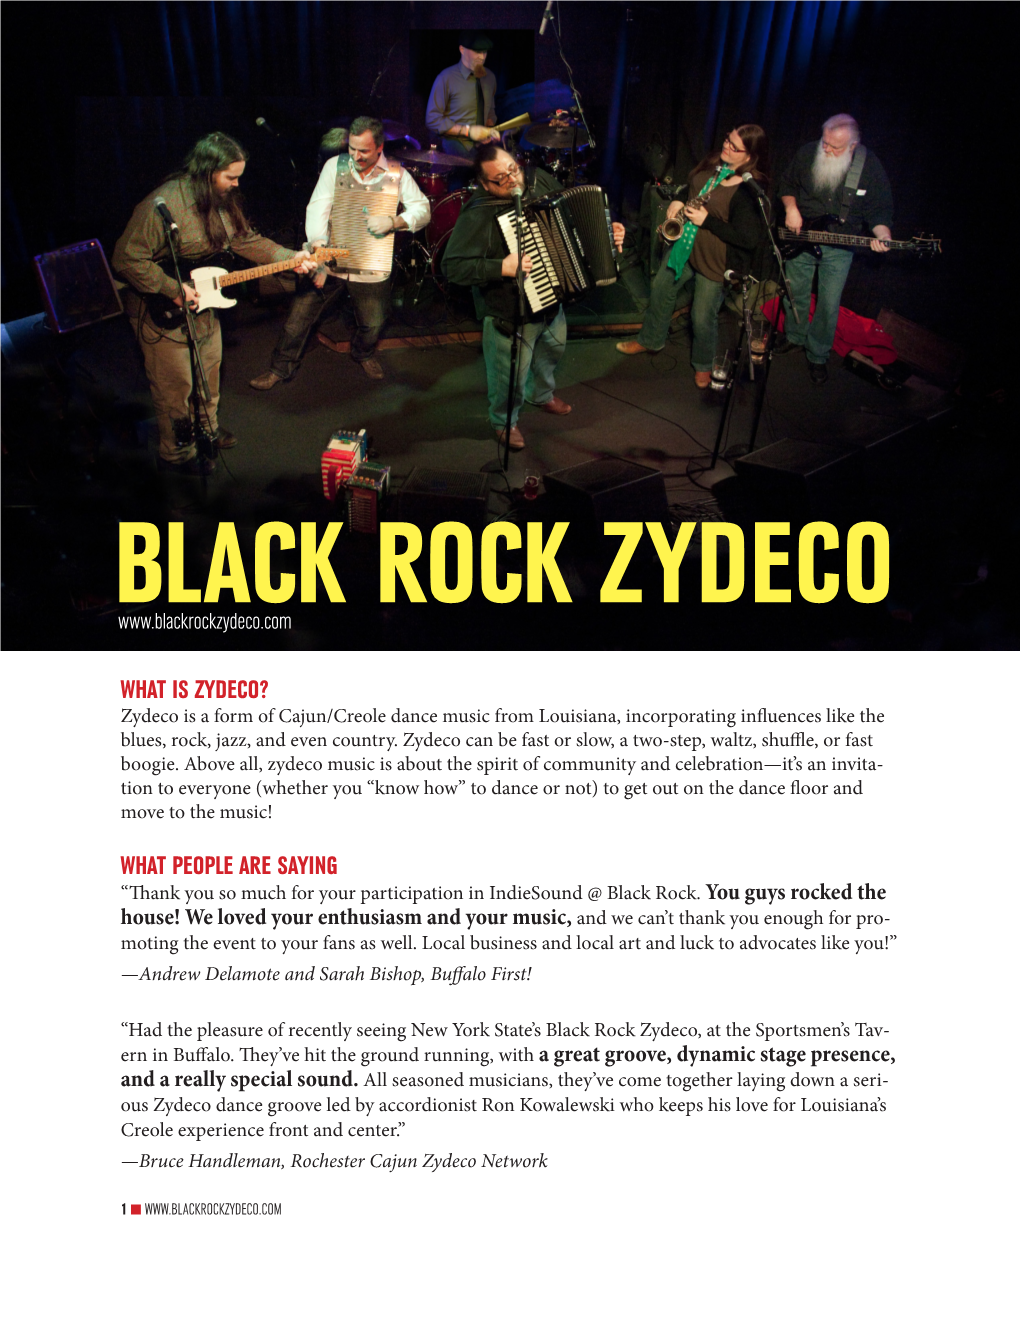 What Is Zydeco? What People Are Saying